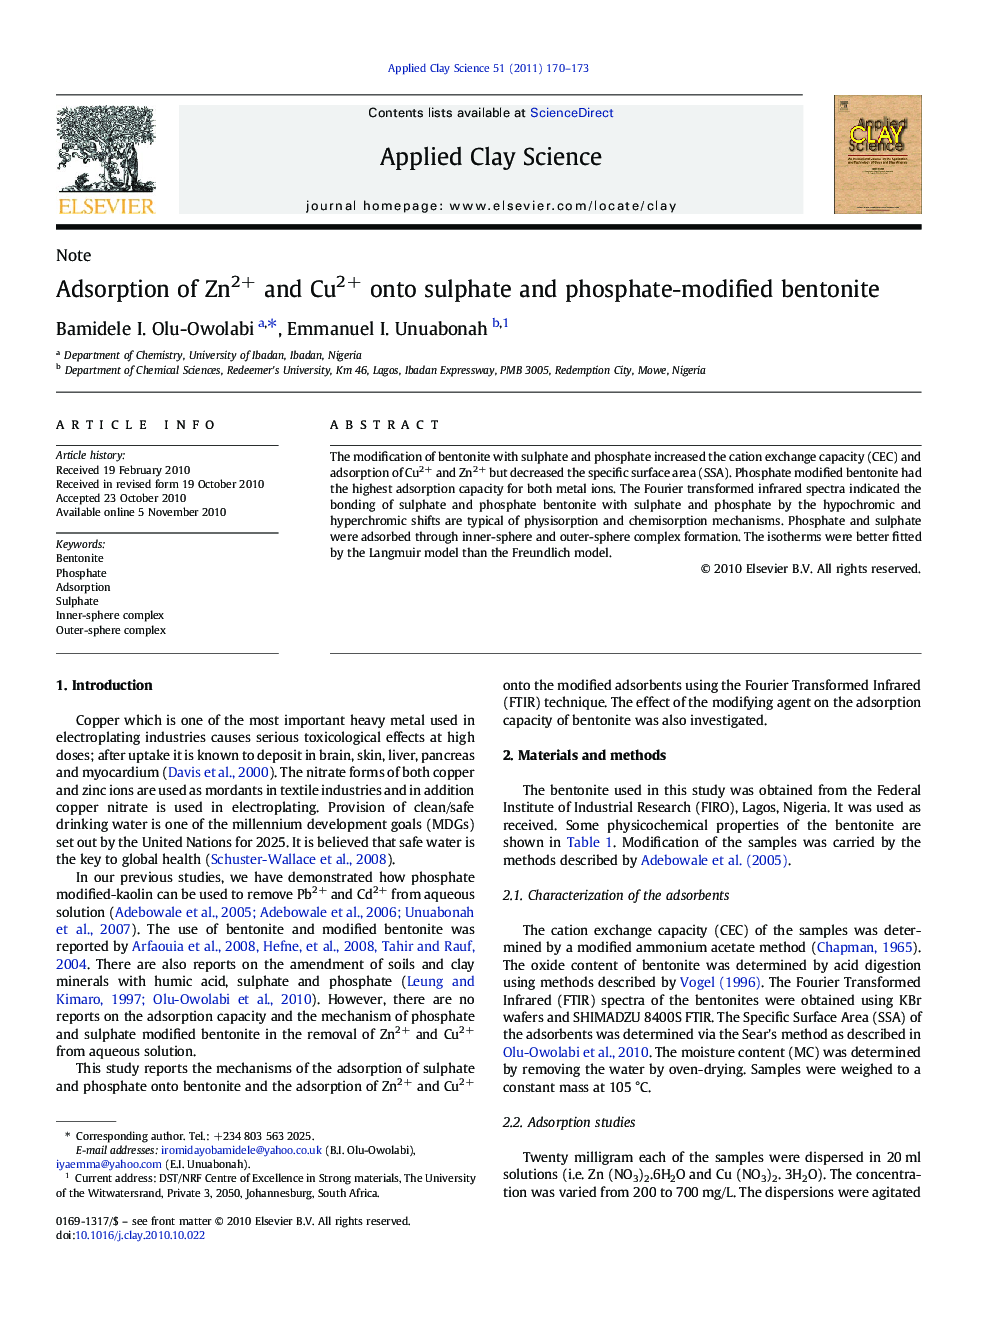 Adsorption of Zn2+ and Cu2+ onto sulphate and phosphate-modified bentonite